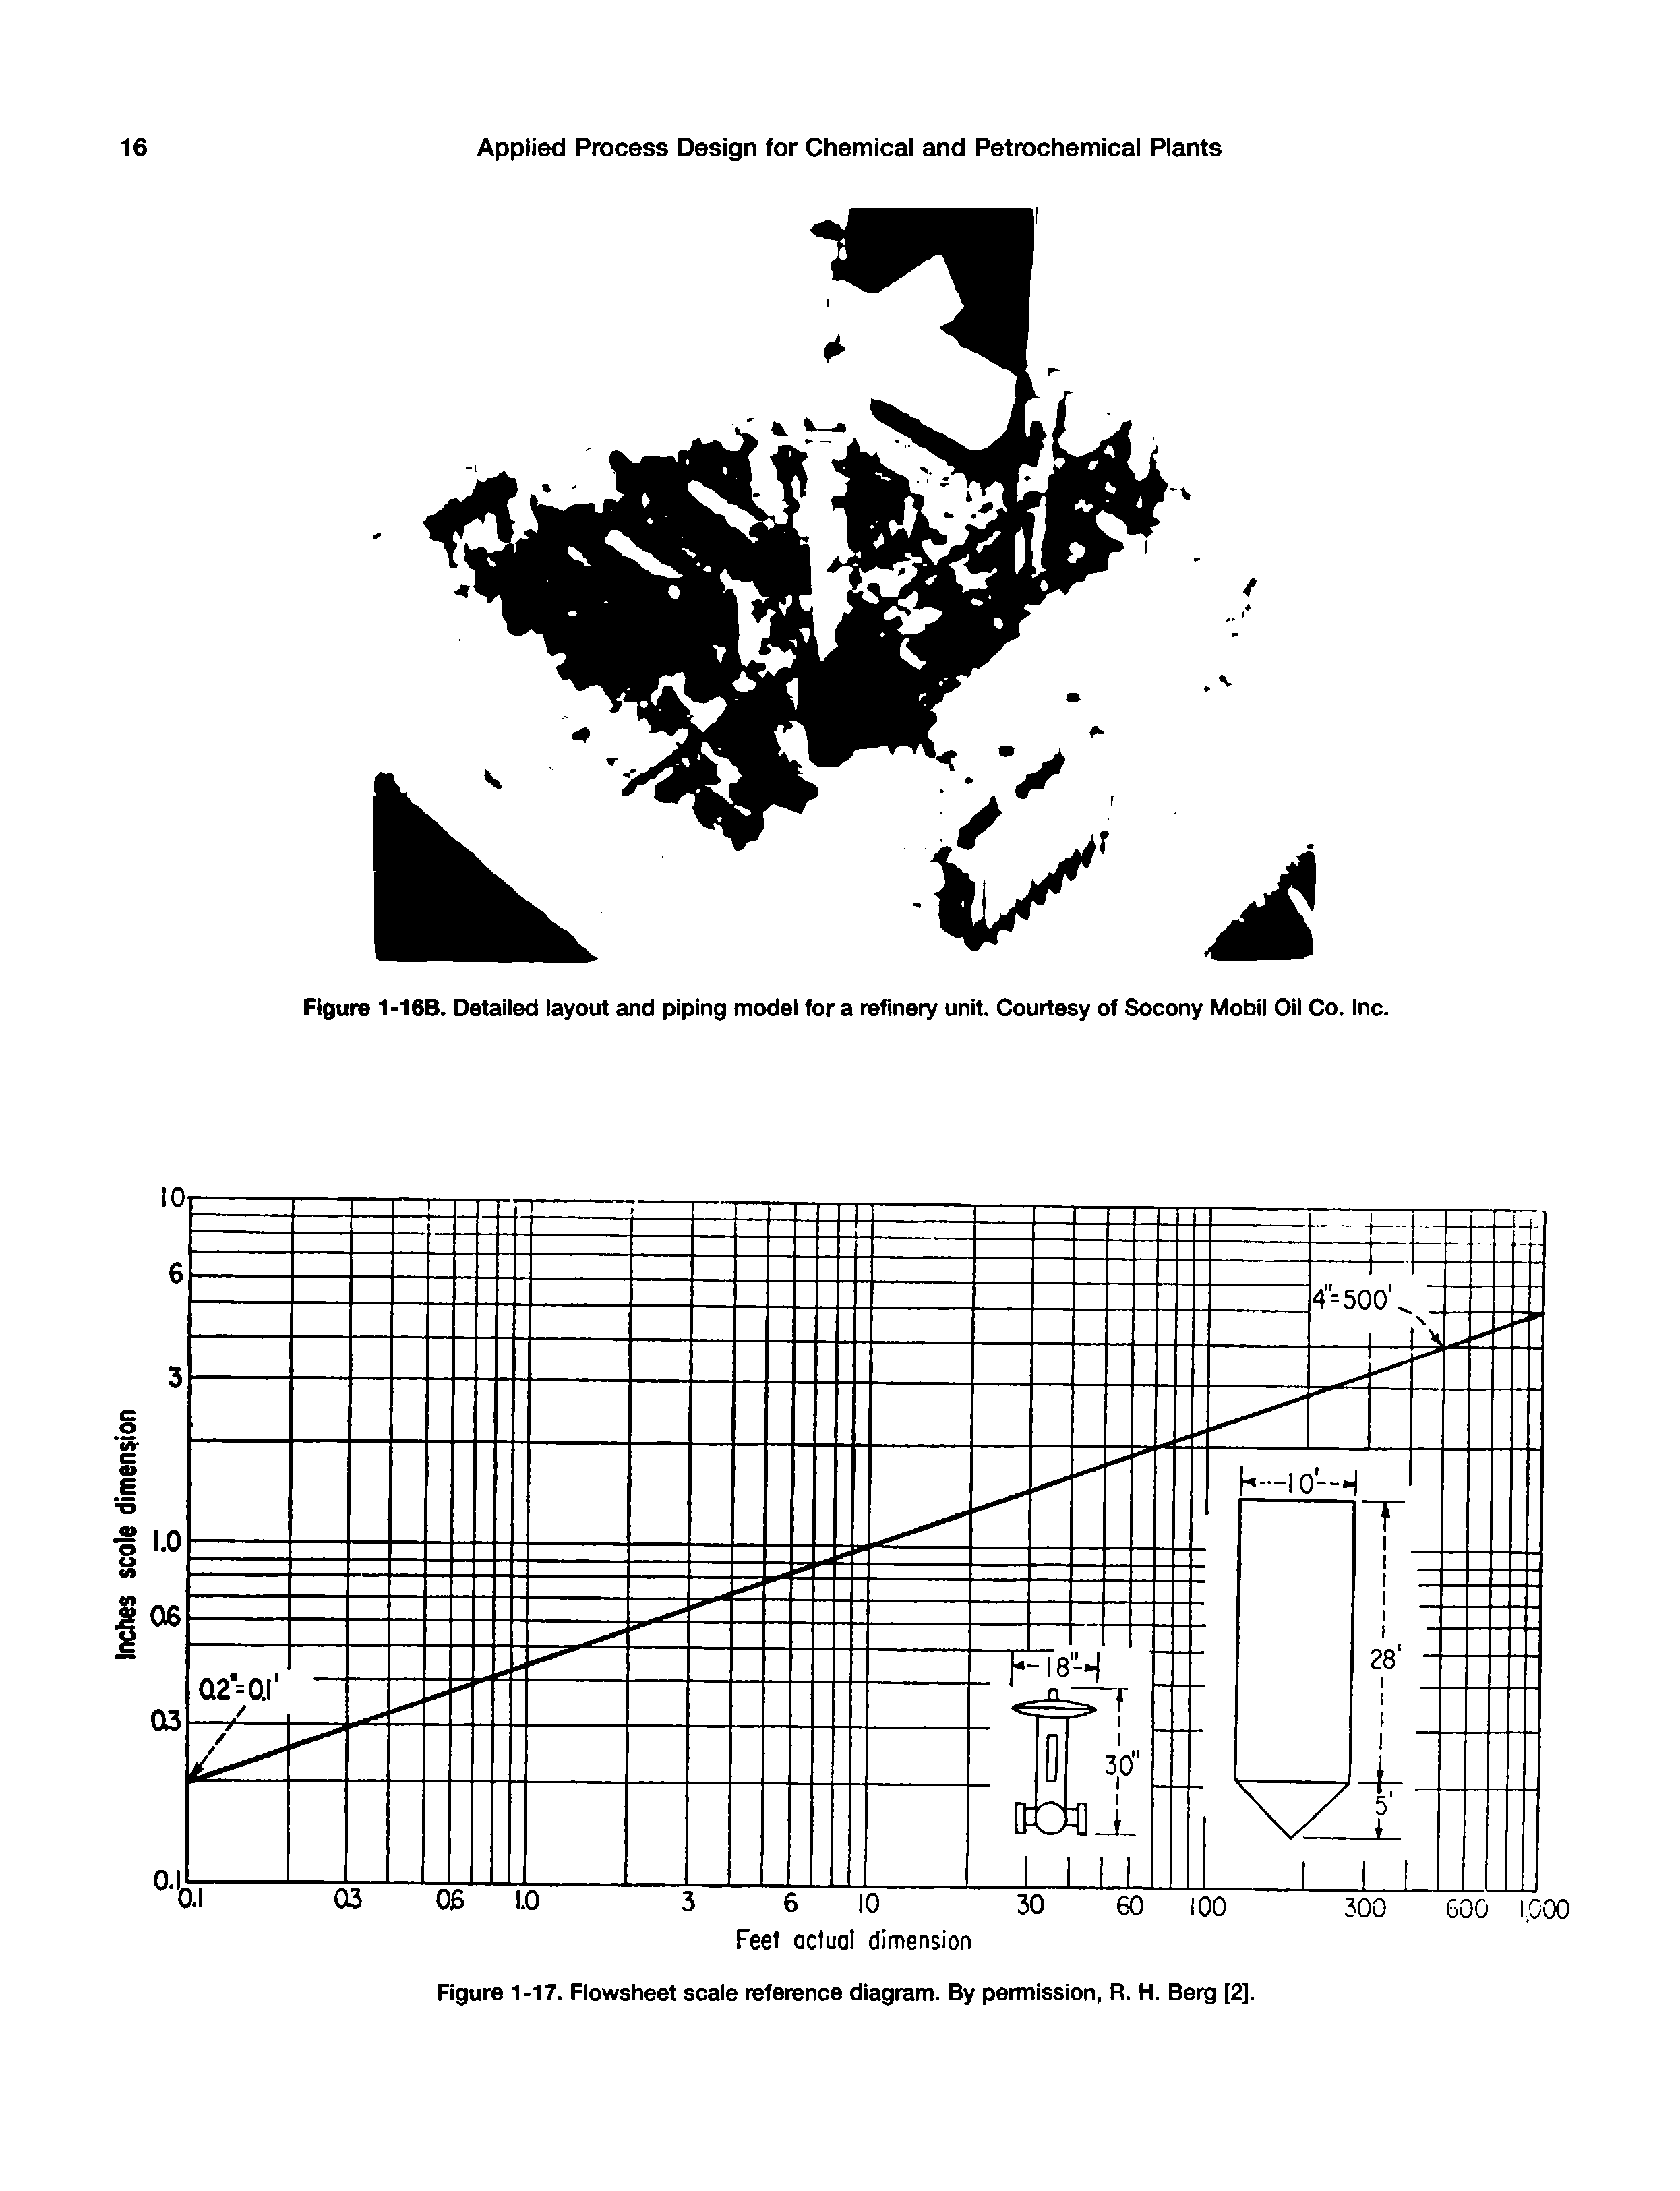 Figure 1-17. Flowsheet scale reference diagram. By permission, R. H. Berg [2].